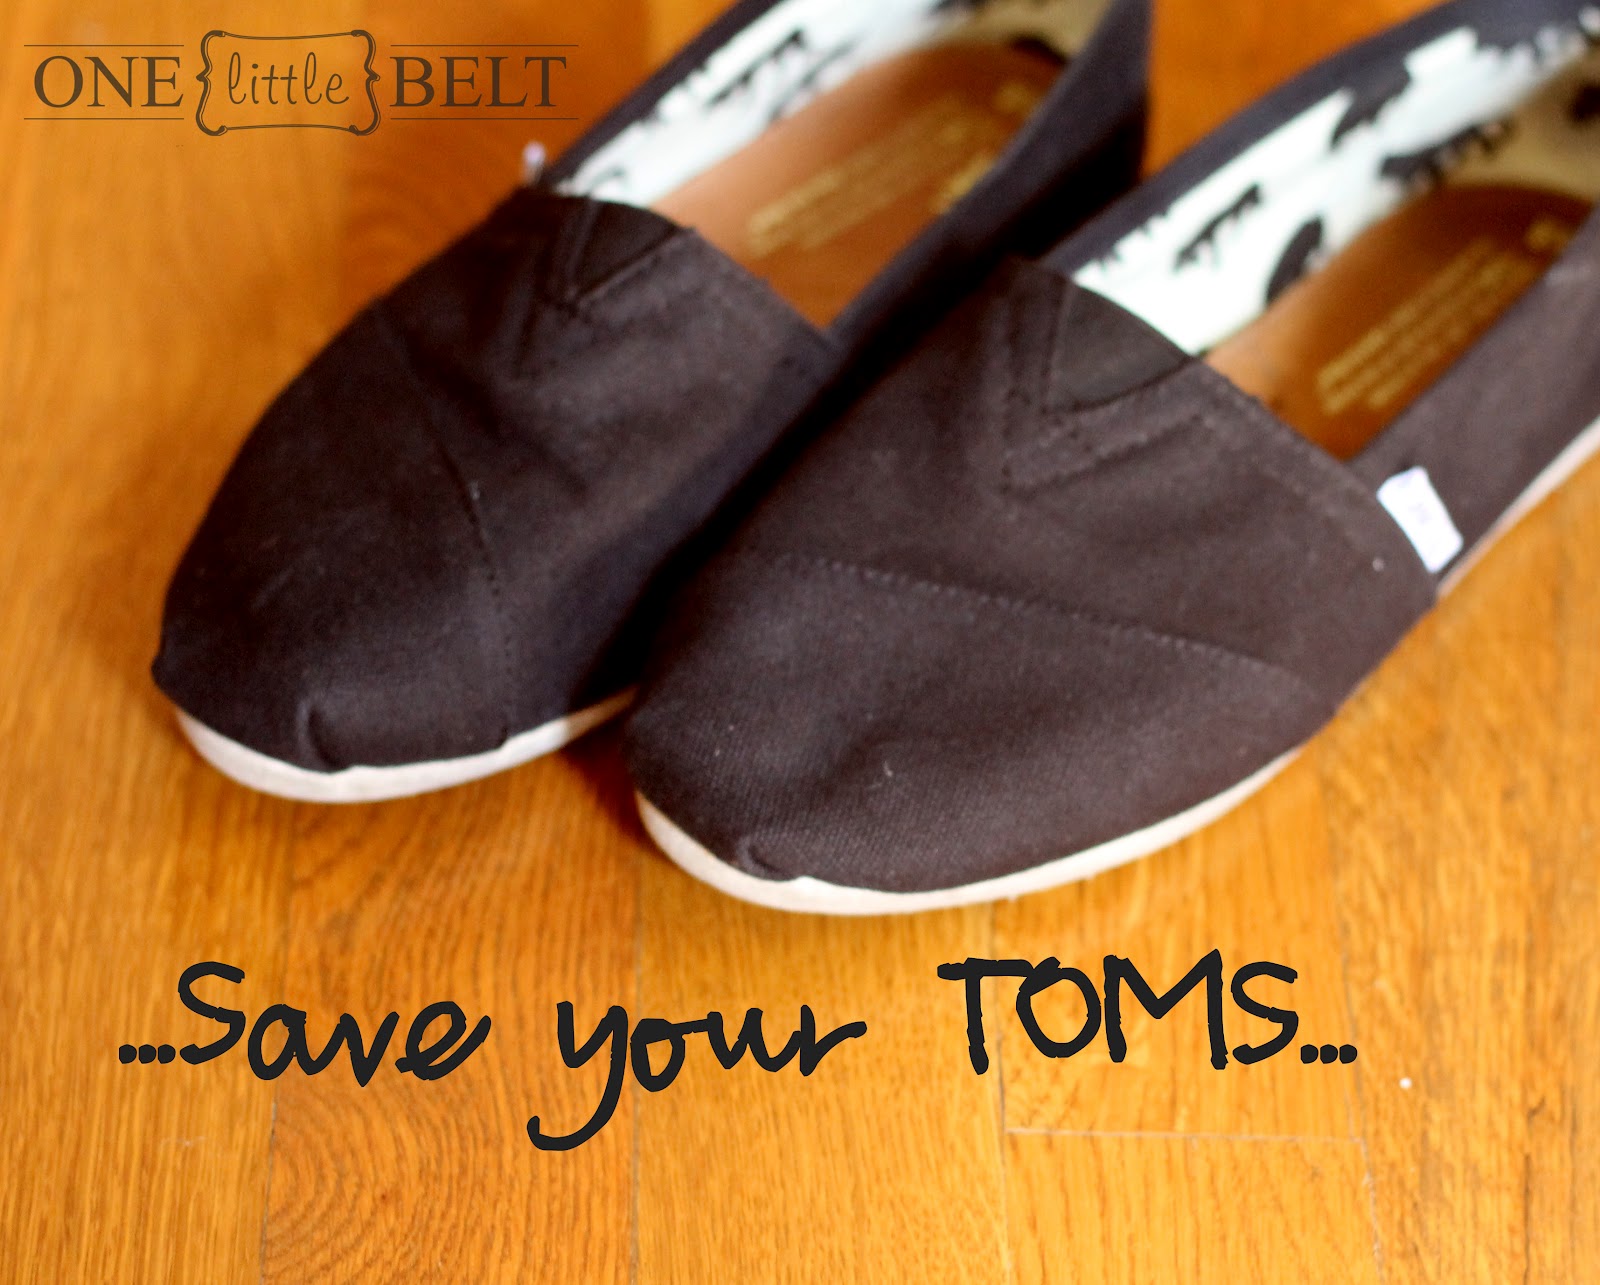 Save your TOMS - ONE little MOMMA